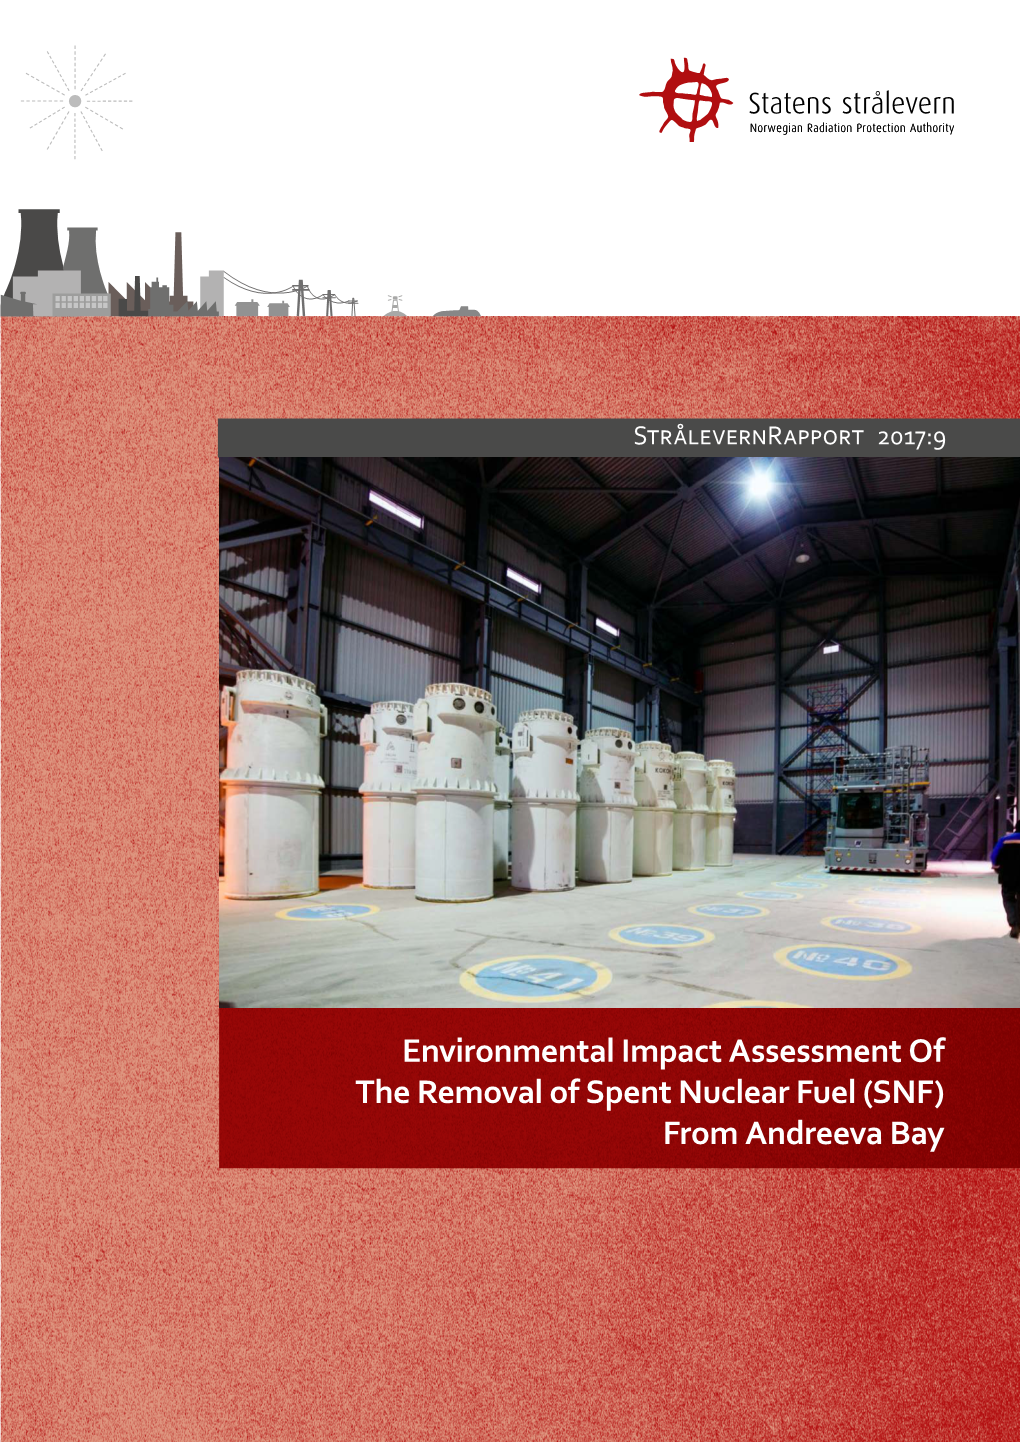 Environmental Impact Assessment of the Removal of Spent Nuclear Fuel